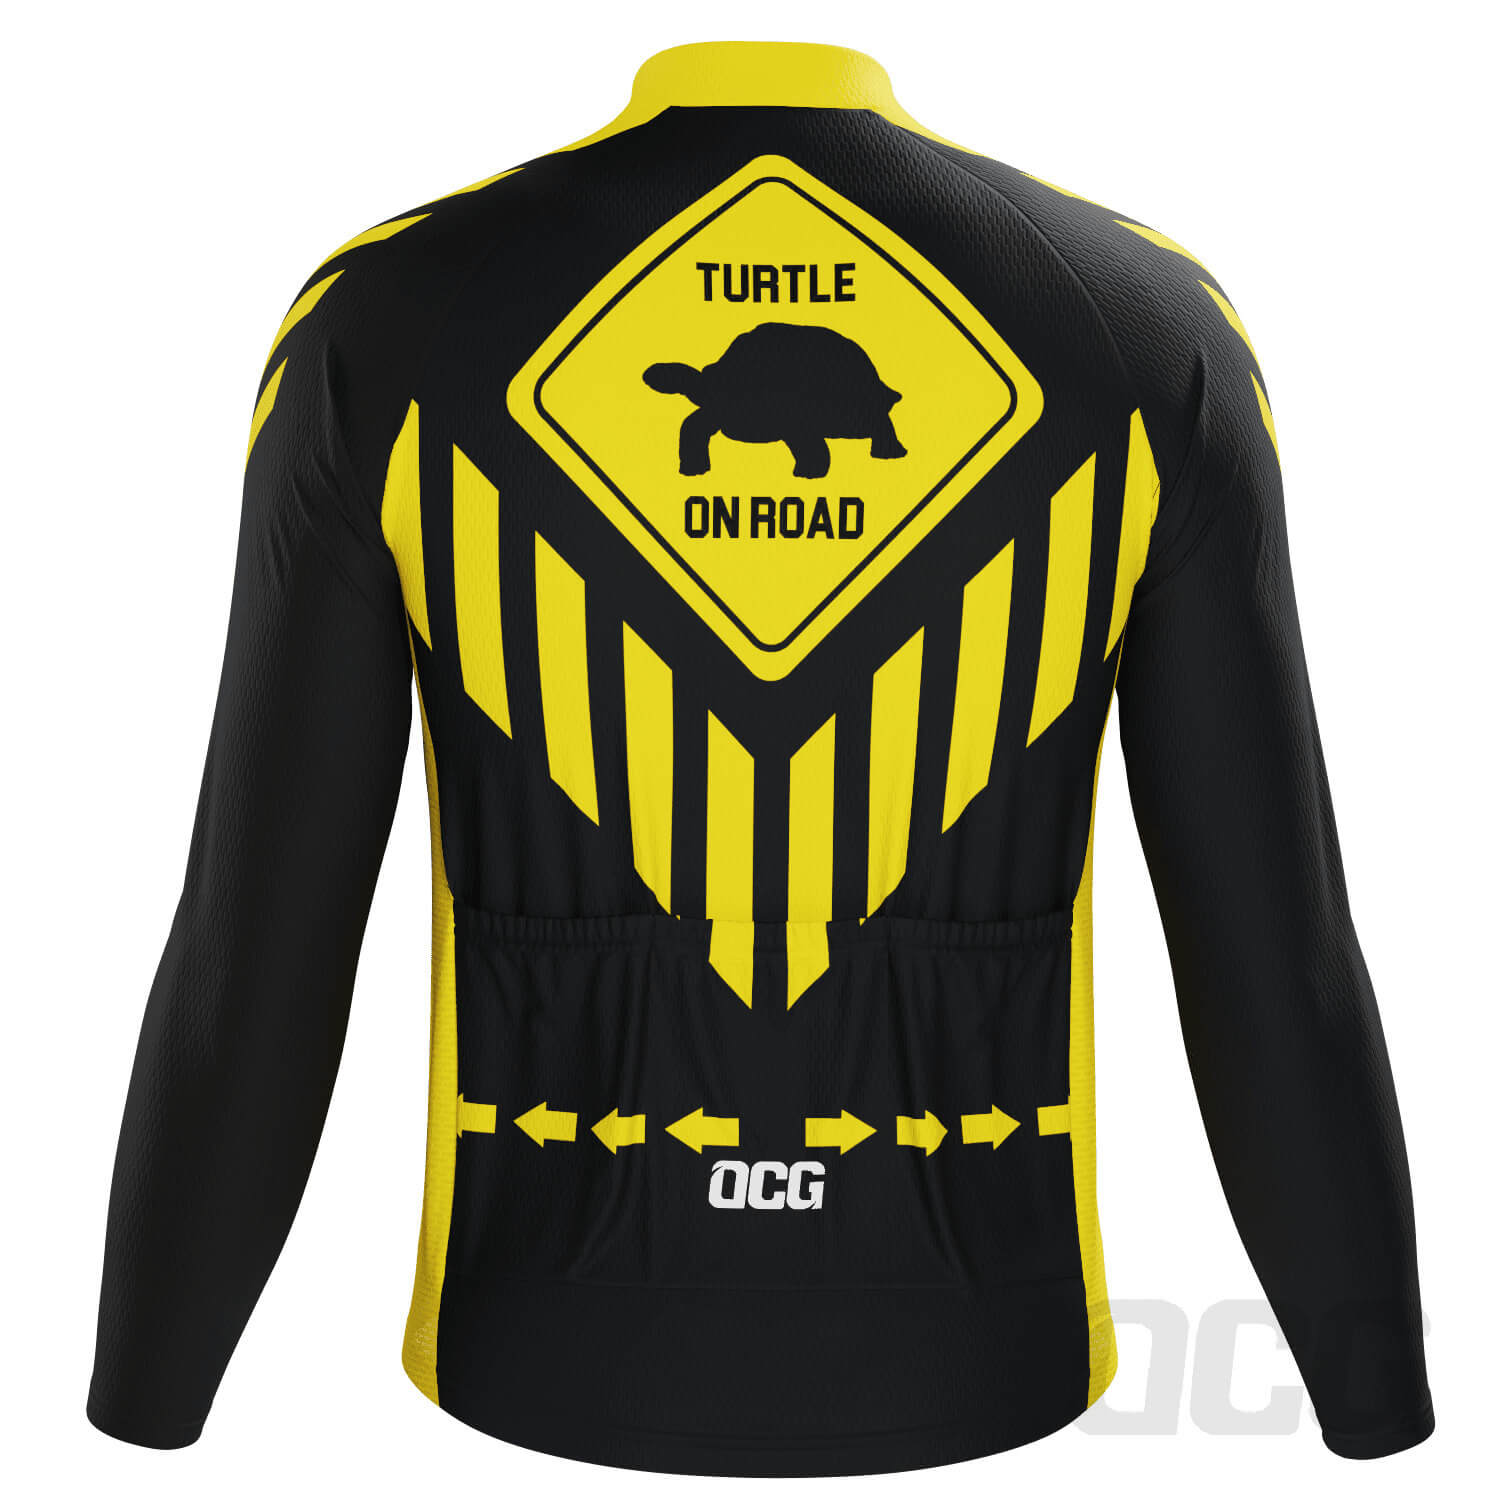 Men's Turtle on Road Long Sleeve Cycling Jersey